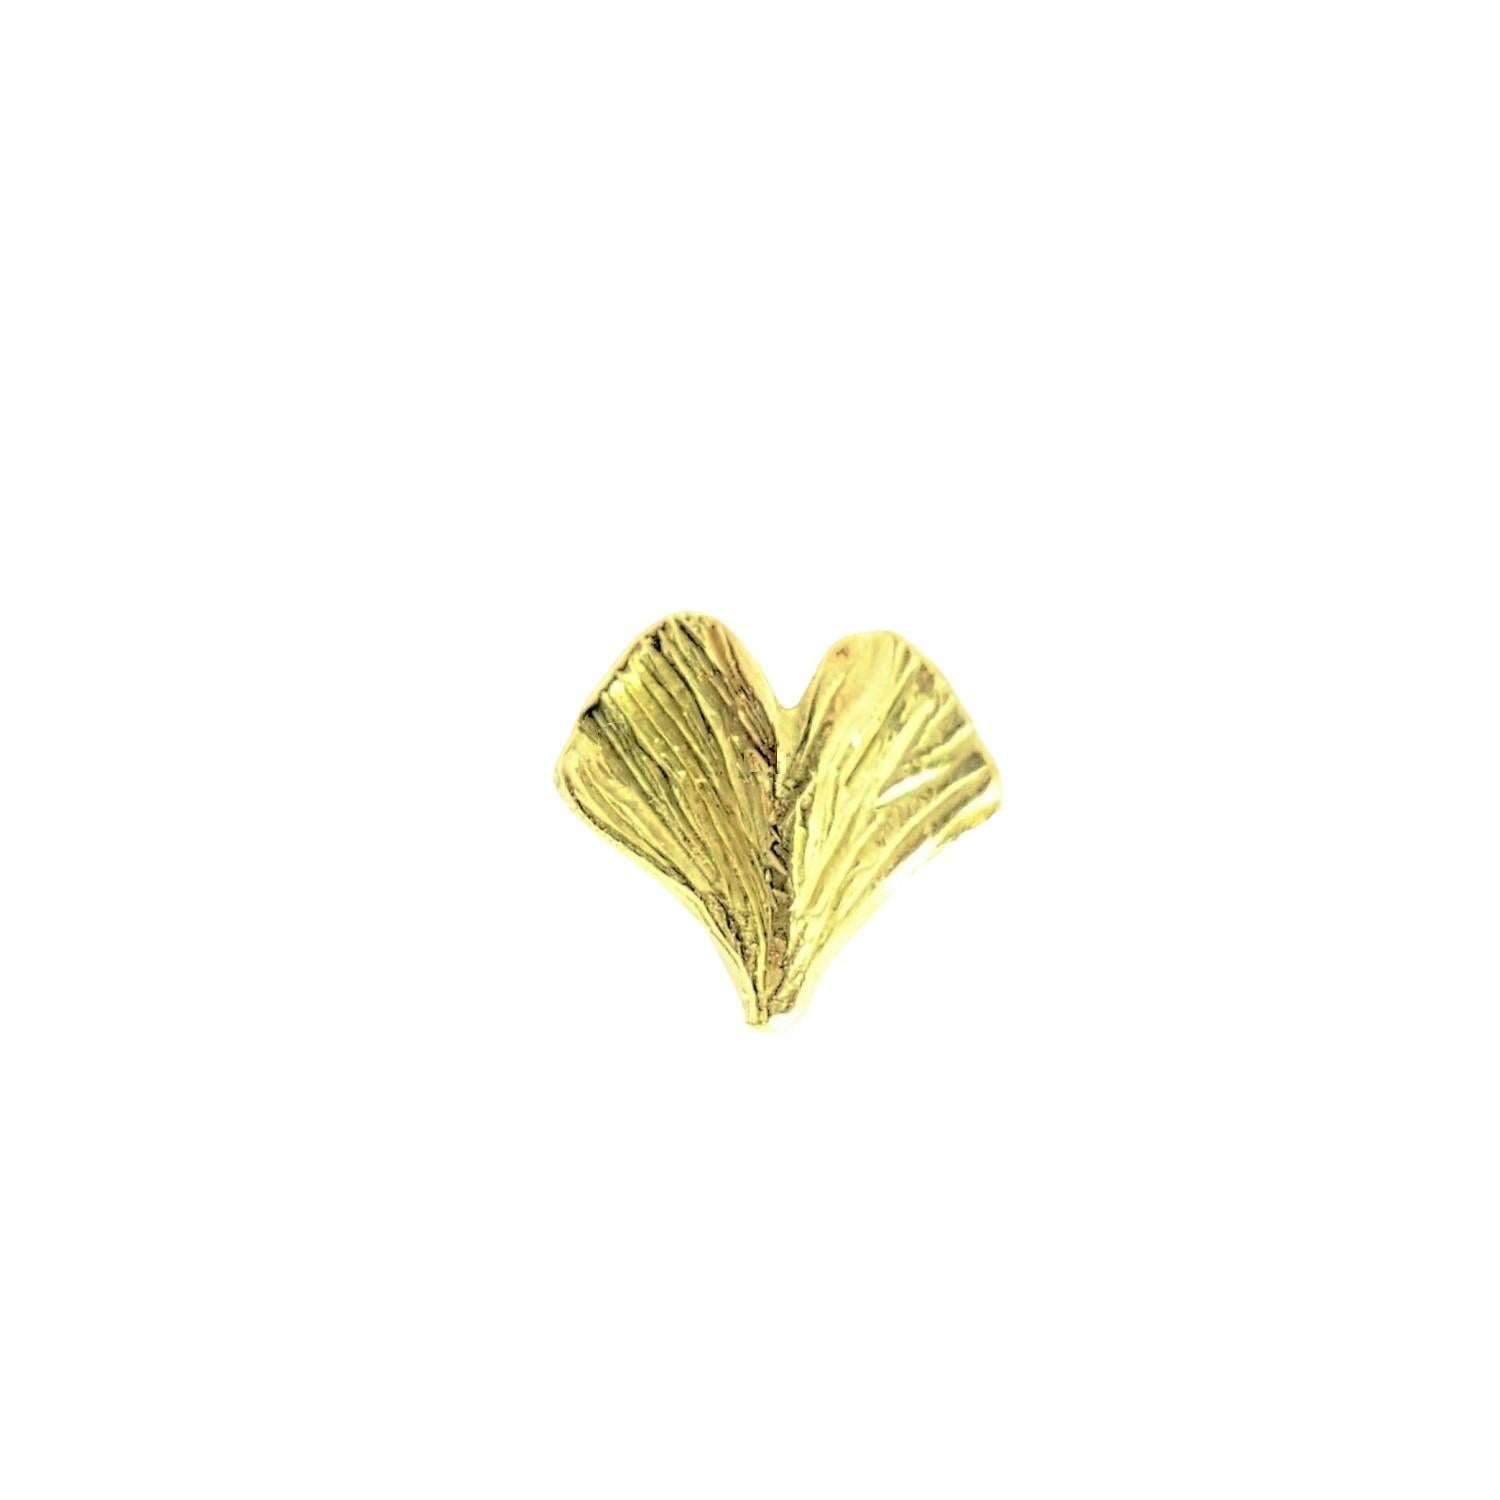 Alison Nagasue jewelry designs began with her branded Gingko leaves. Although she usually designs larger pieces of jewelry in 18K gold, these stud earrings were needed by her customers with multiple piercings. Yellow green gold is Alison's go to